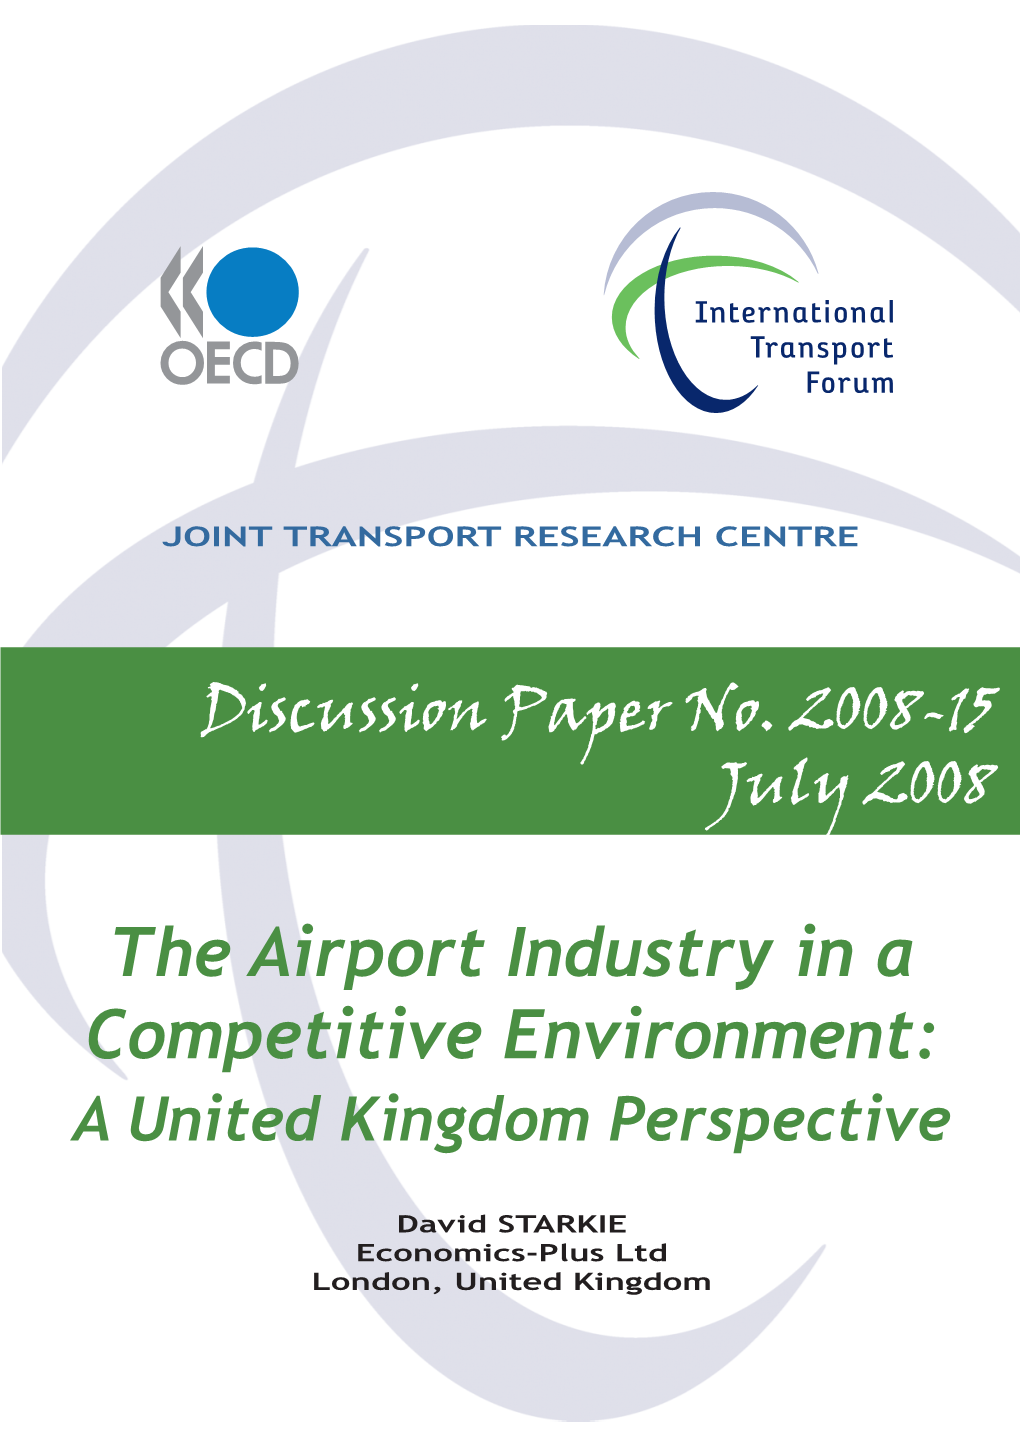 The Airport Industry in a Competitive Environment: a United Kingdom Perspective